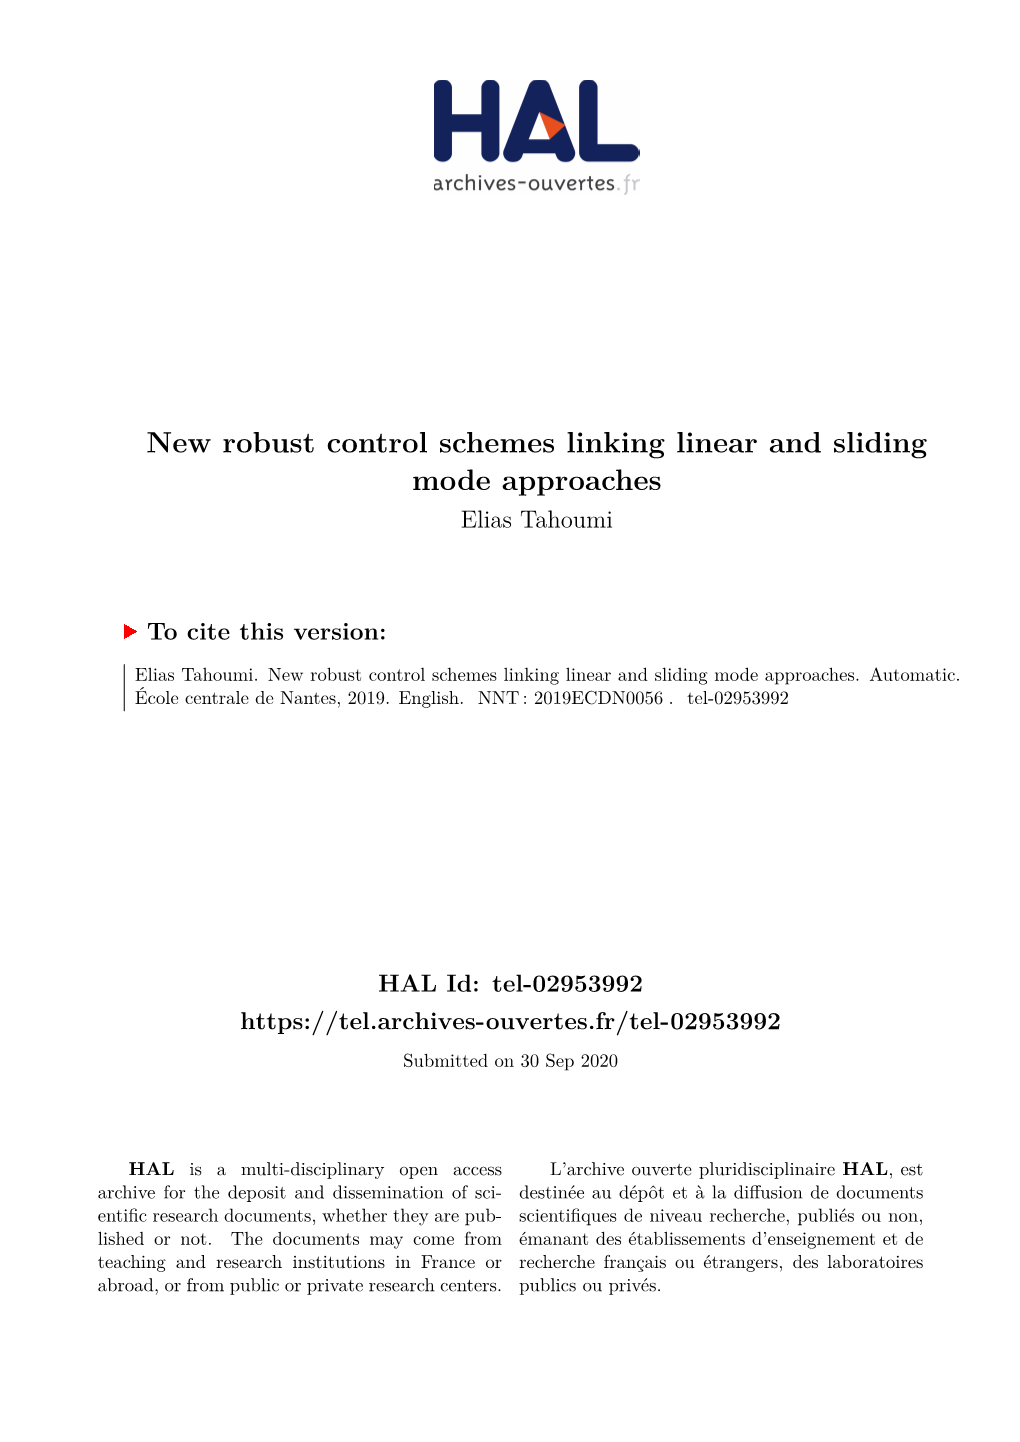 New Robust Control Schemes Linking Linear and Sliding Mode Approaches Elias Tahoumi